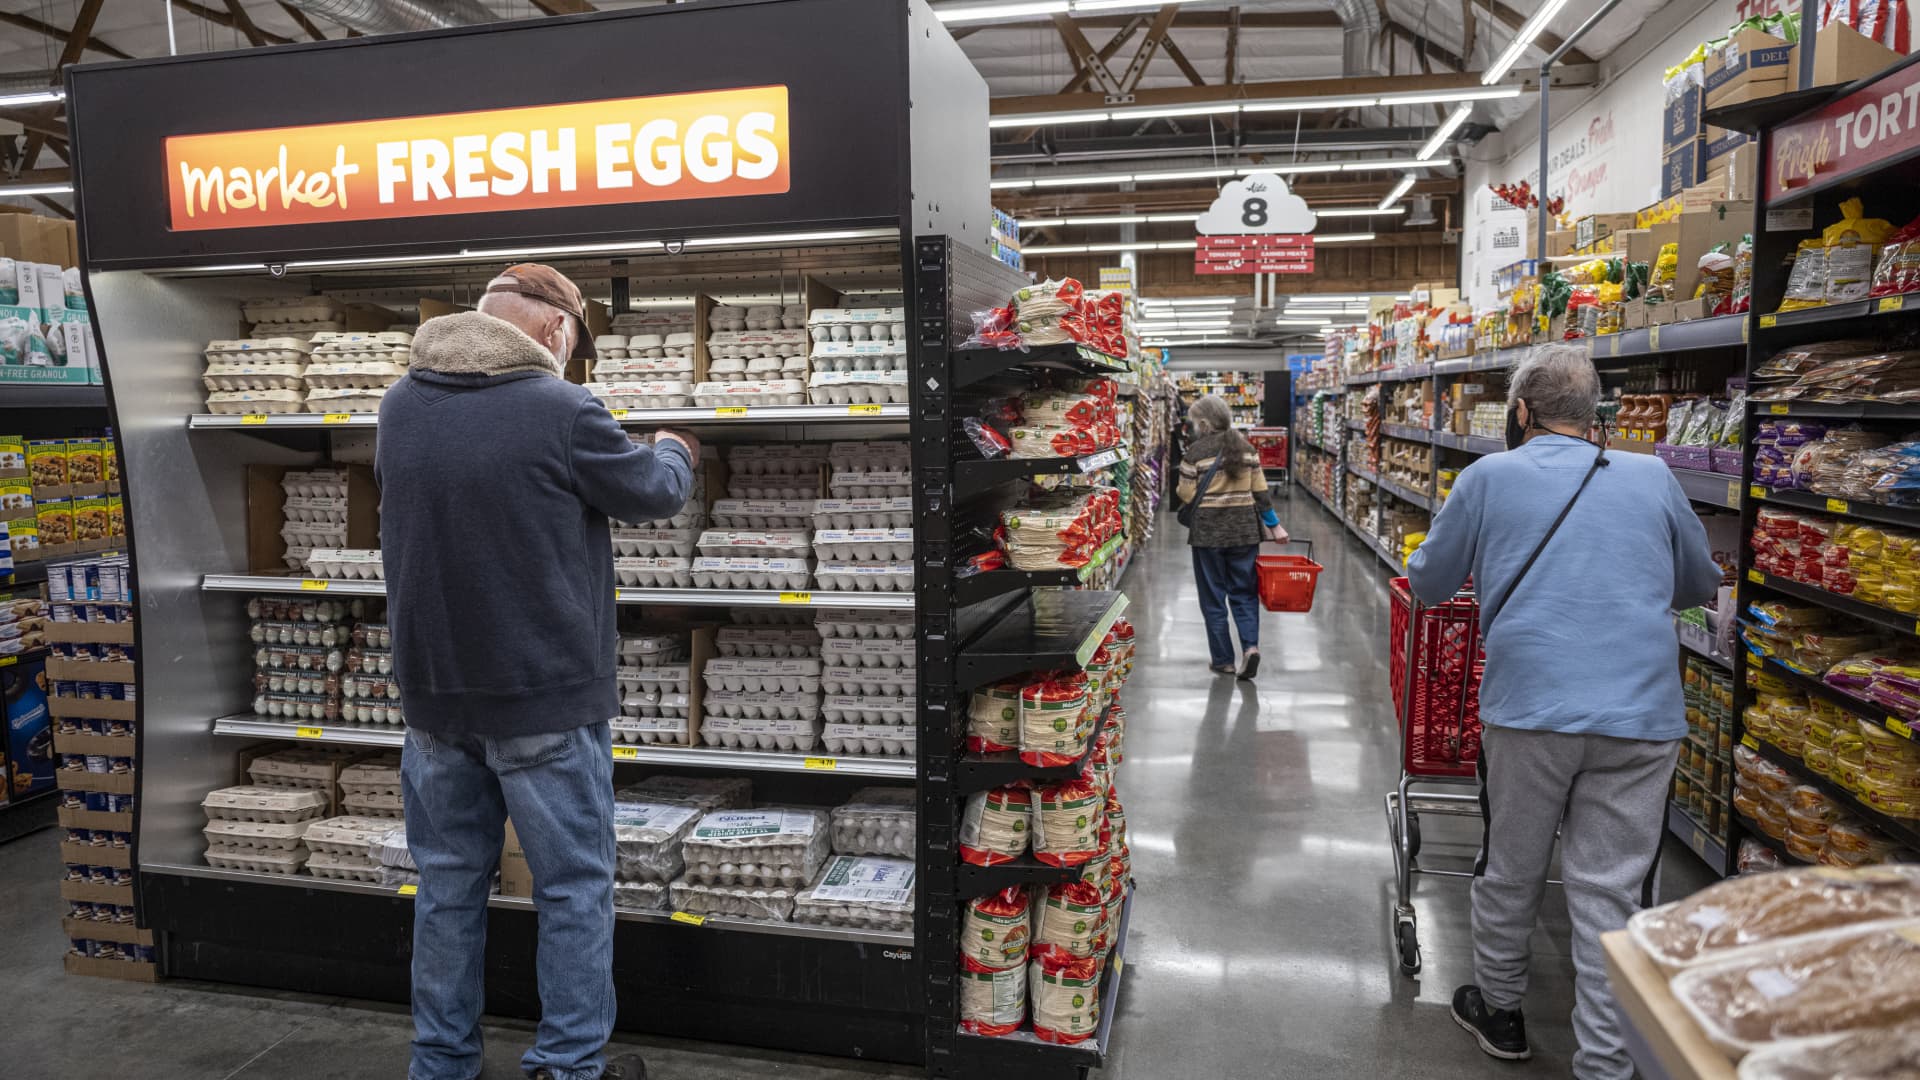 School lunch, eggs and airfare: Why inflation soared for 10 items in 2022